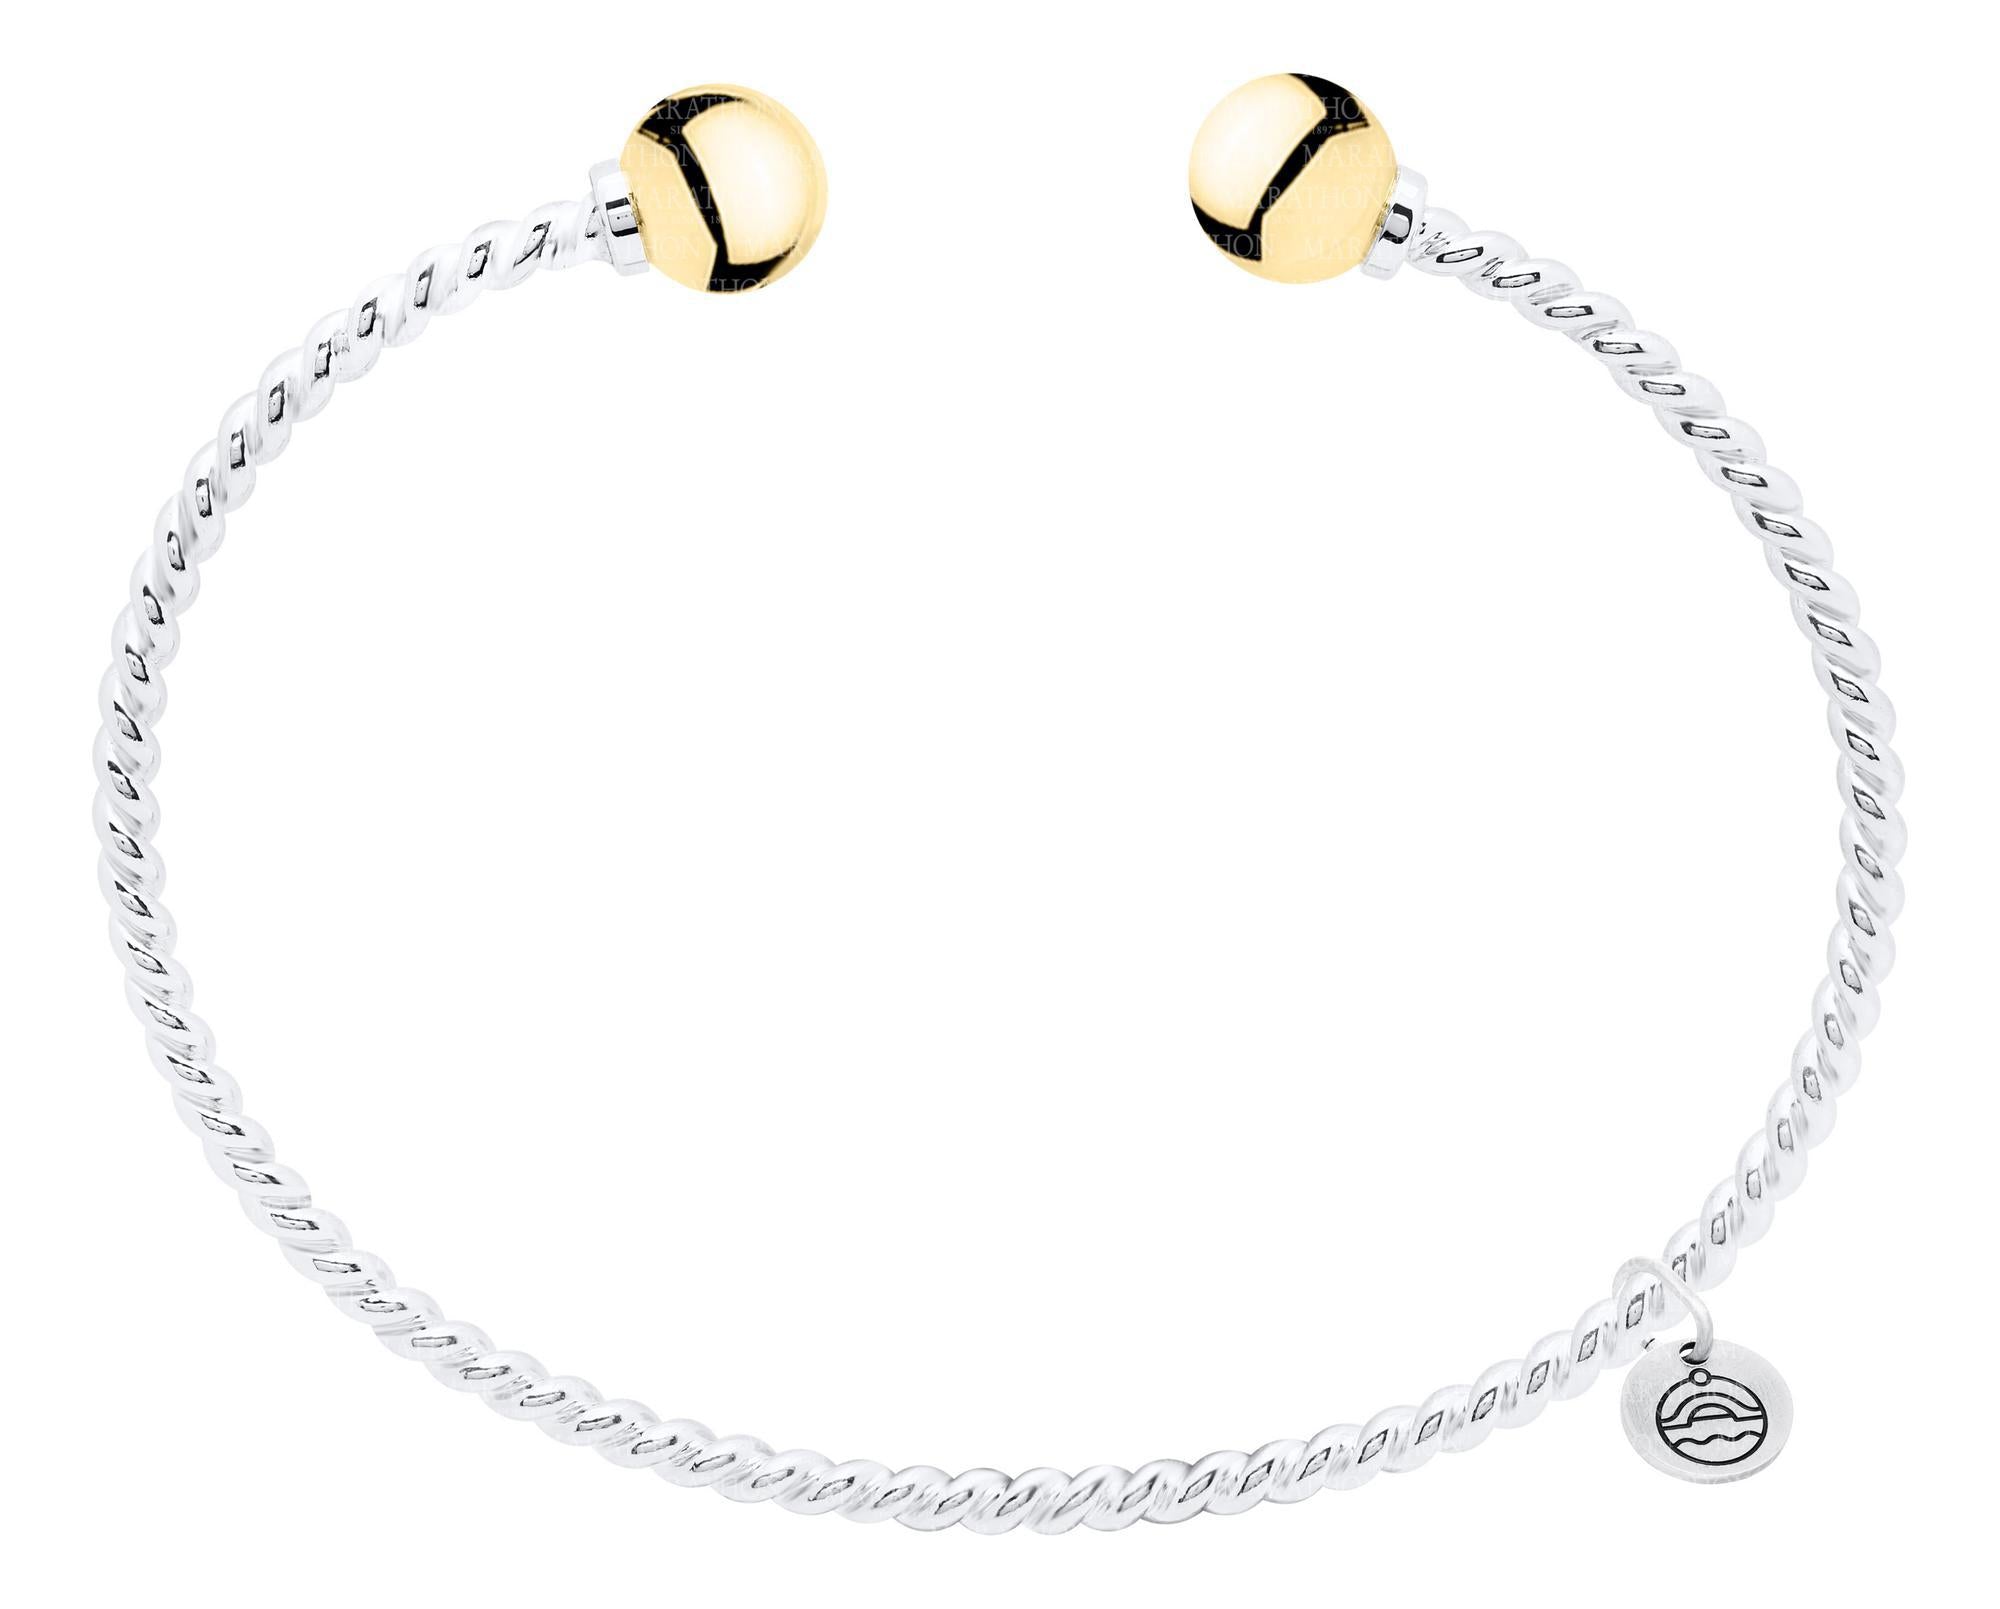 Genuine Sterling Silver Cape Cod Twist Cuff Bracelet with Polished 14k Yellow Gold End Beads